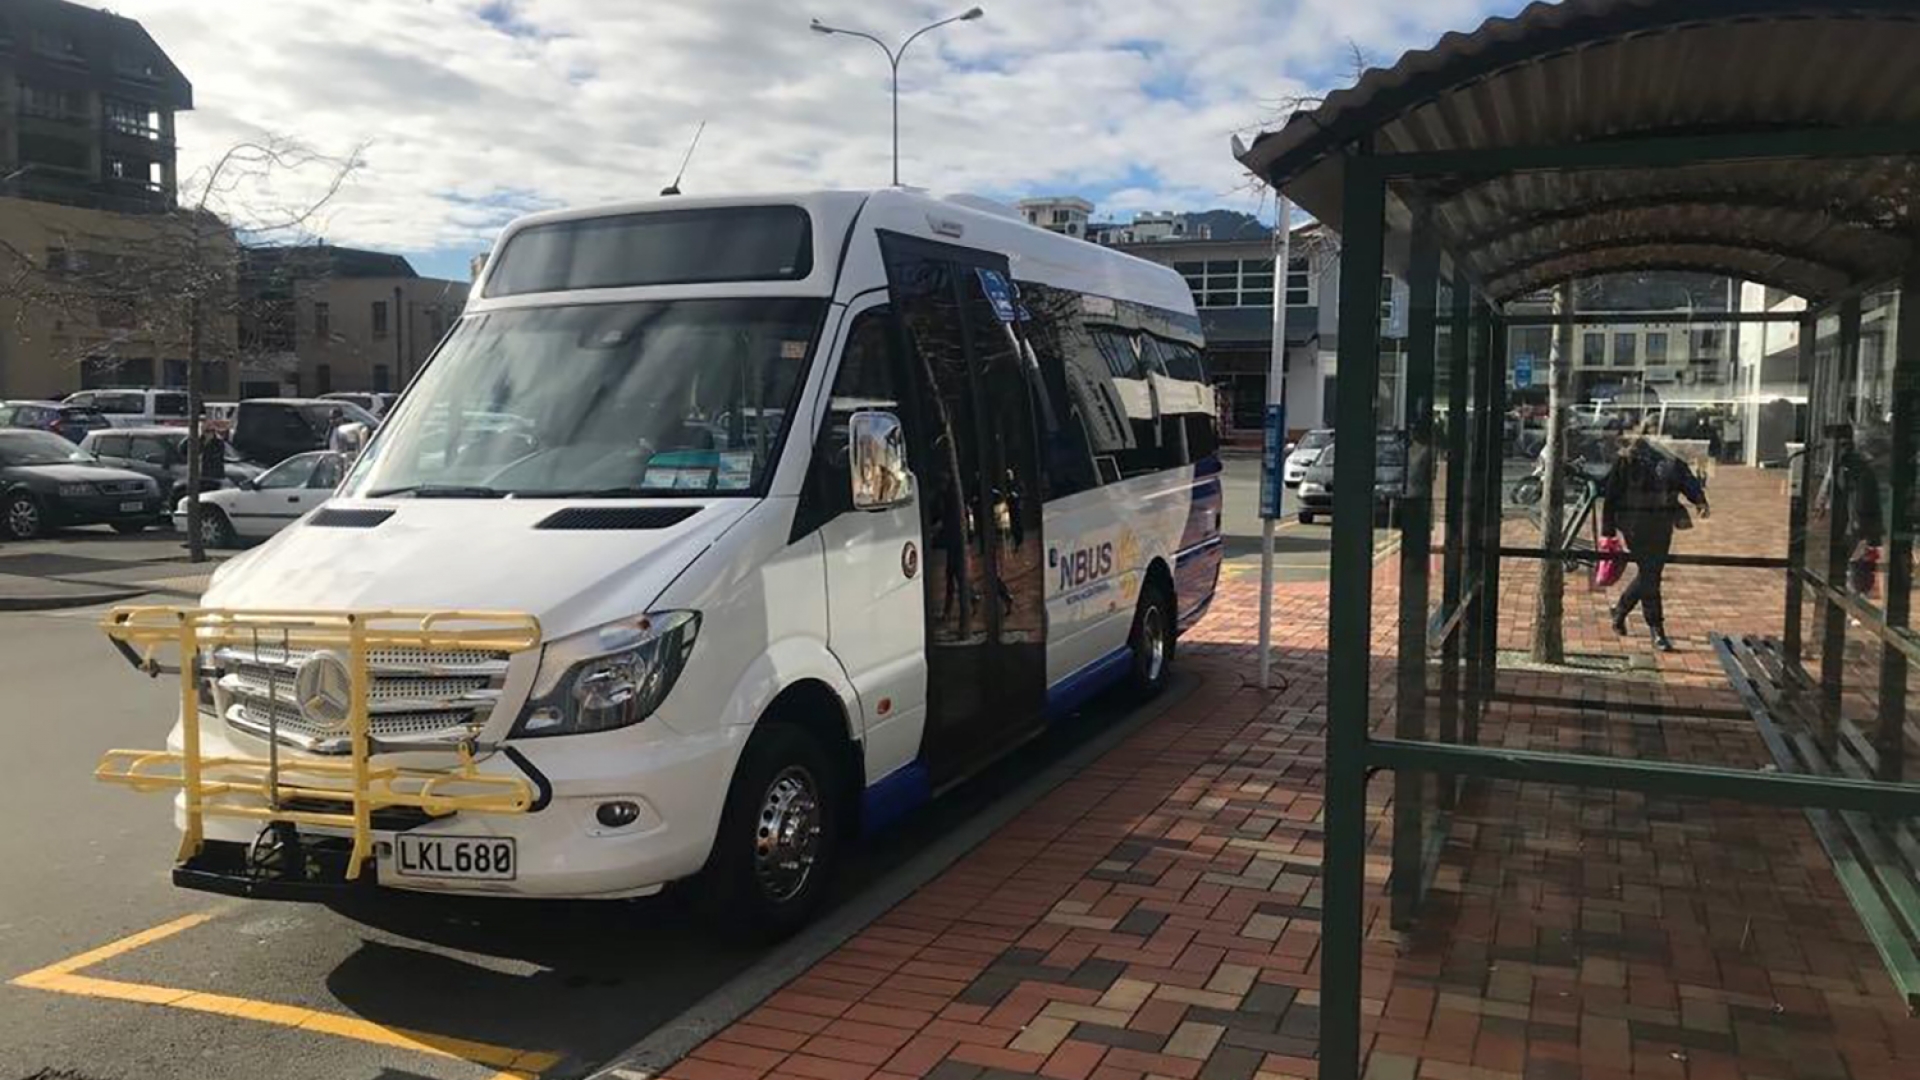 All Council buses will be FREE from noon until midnight on game day for the All Blacks vs Argentina rugby test match in Nelson.